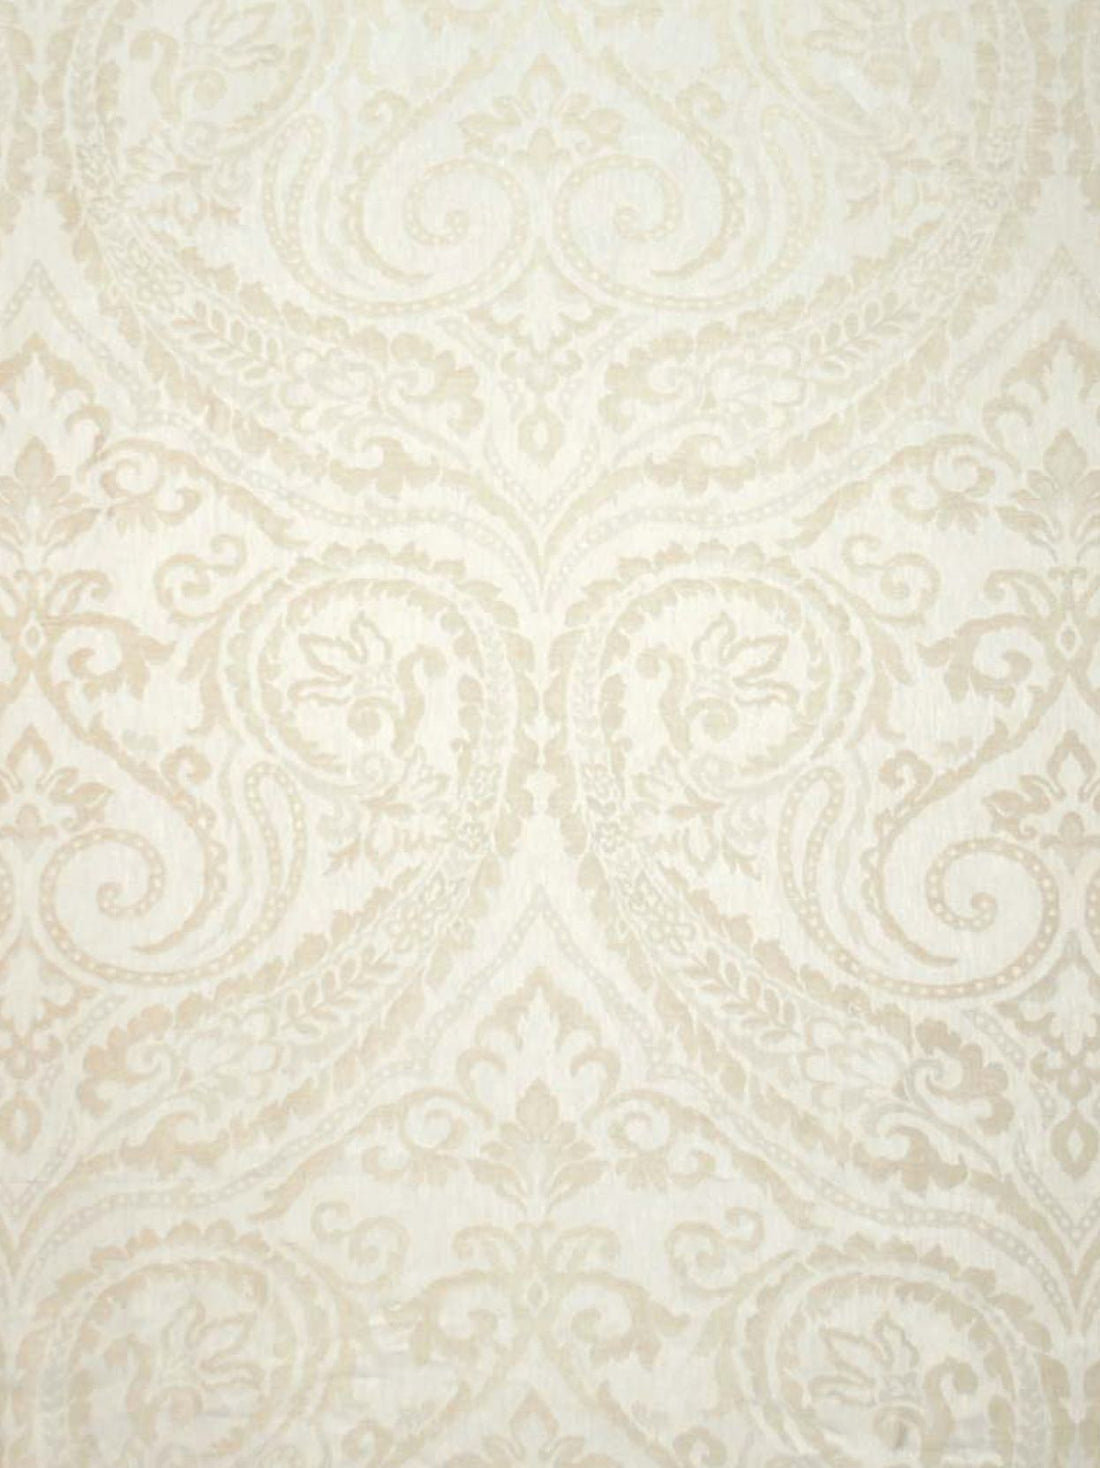 Blanchisserie fabric in parchment color - pattern number SV 00024705 - by Scalamandre in the Old World Weavers collection